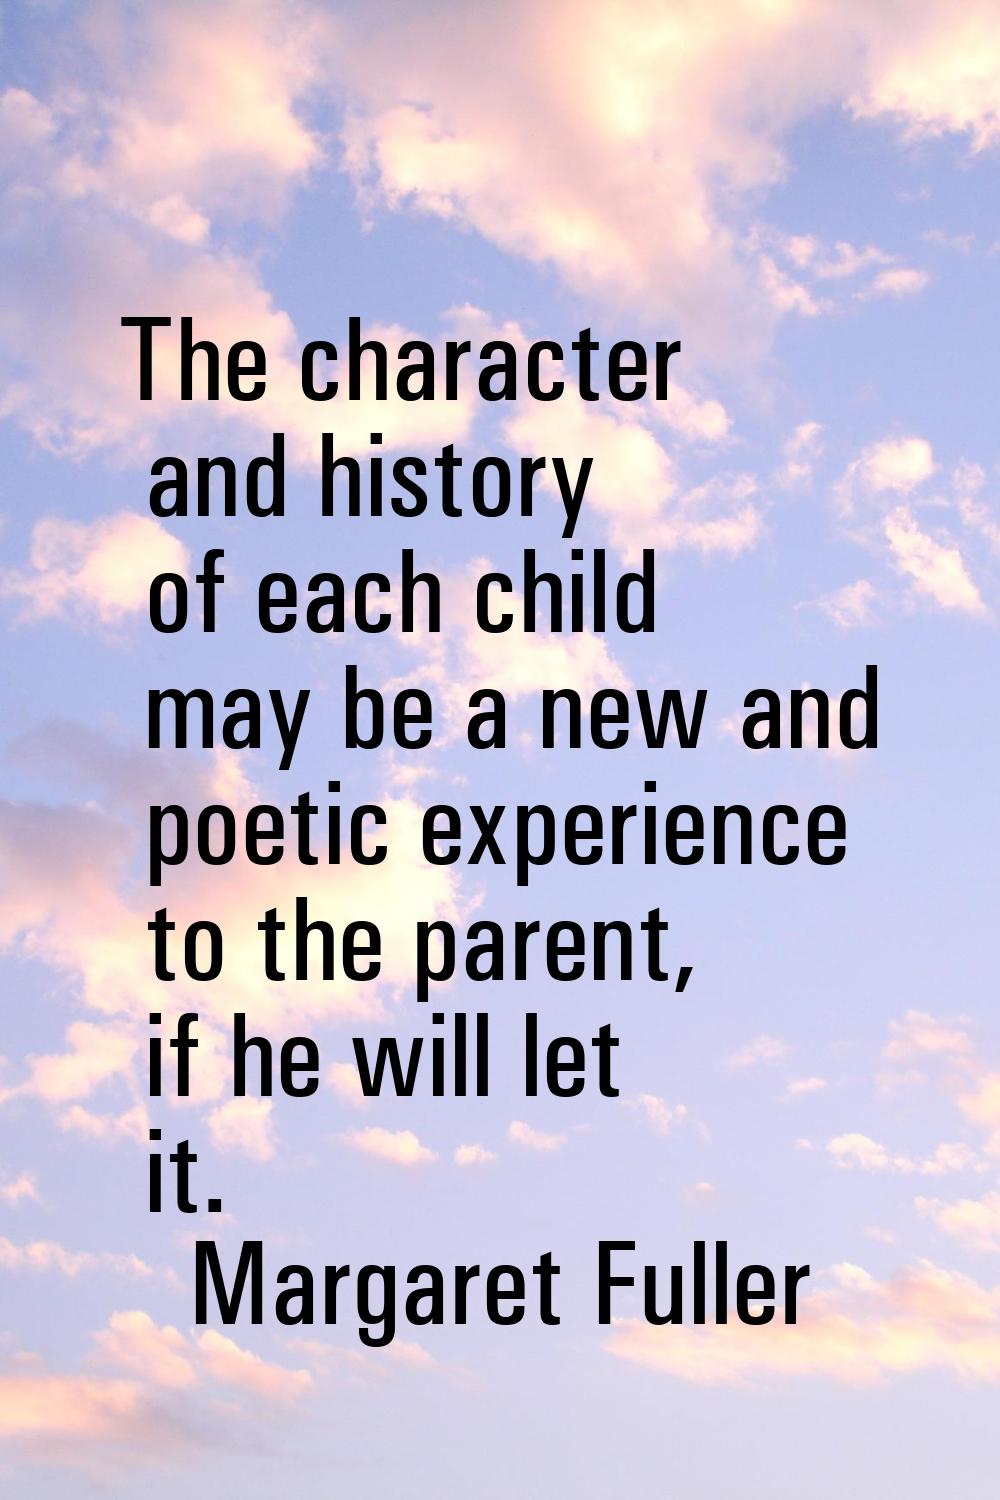 The character and history of each child may be a new and poetic experience to the parent, if he wil